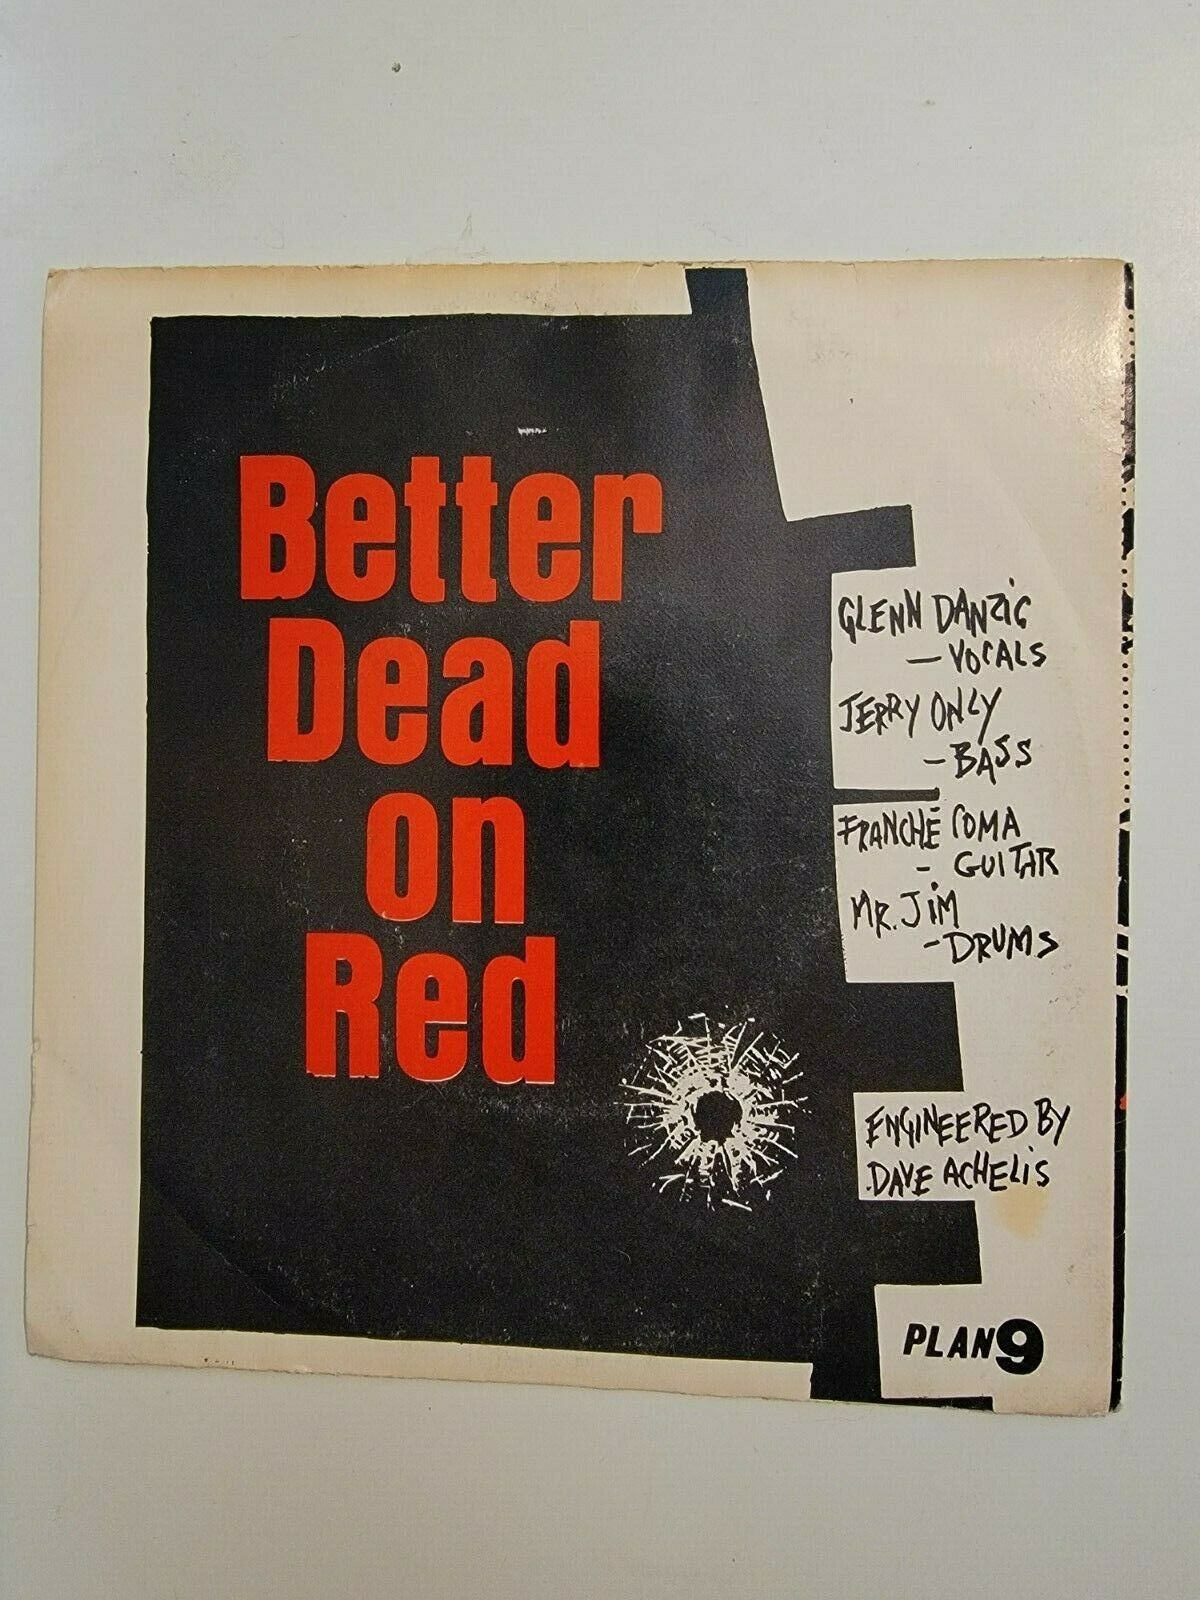 Pic 1 The Misfits - Bullet 7" Vinyl - Better Dead on Red - Press 1000 -Translucent Red